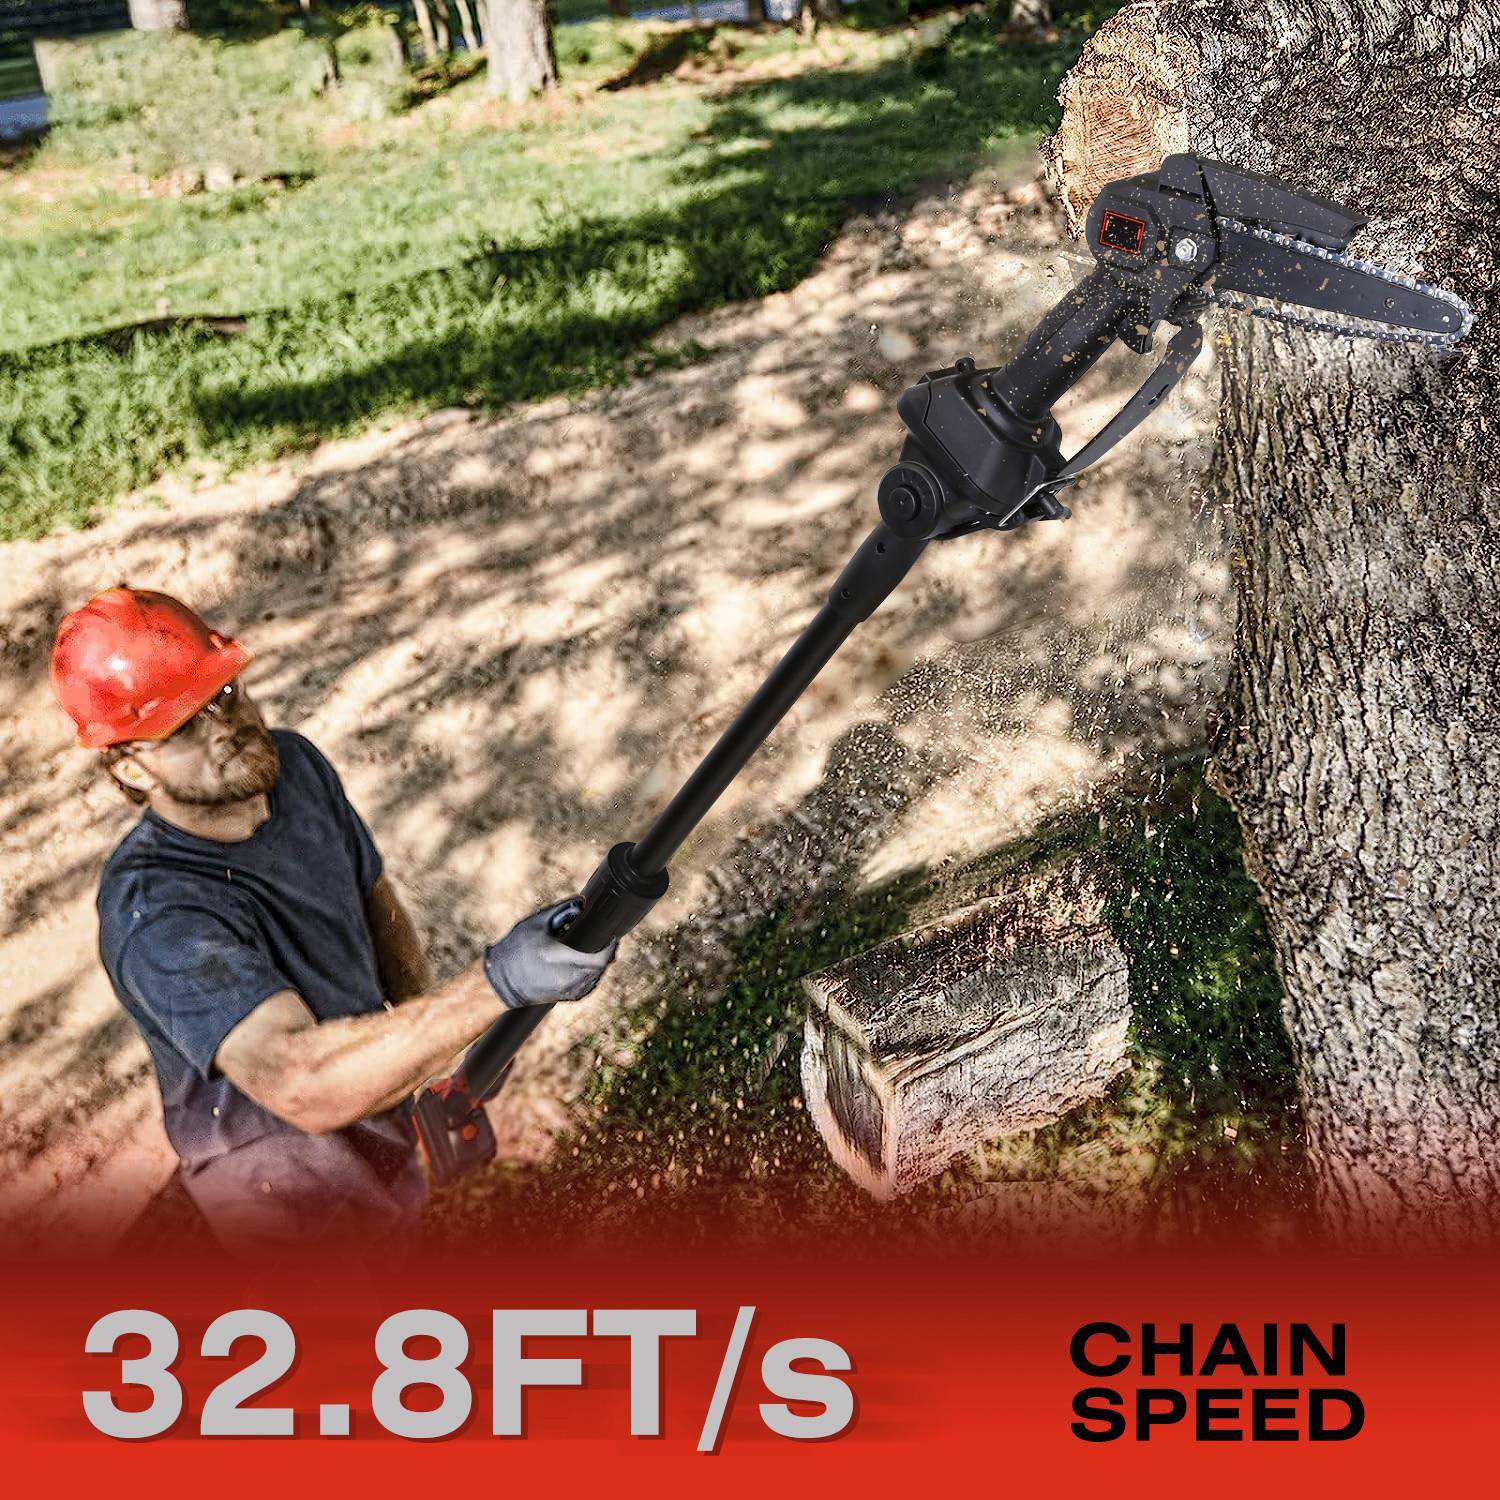 2-in-1 Cordless Pole Saw and Small Chainsaw